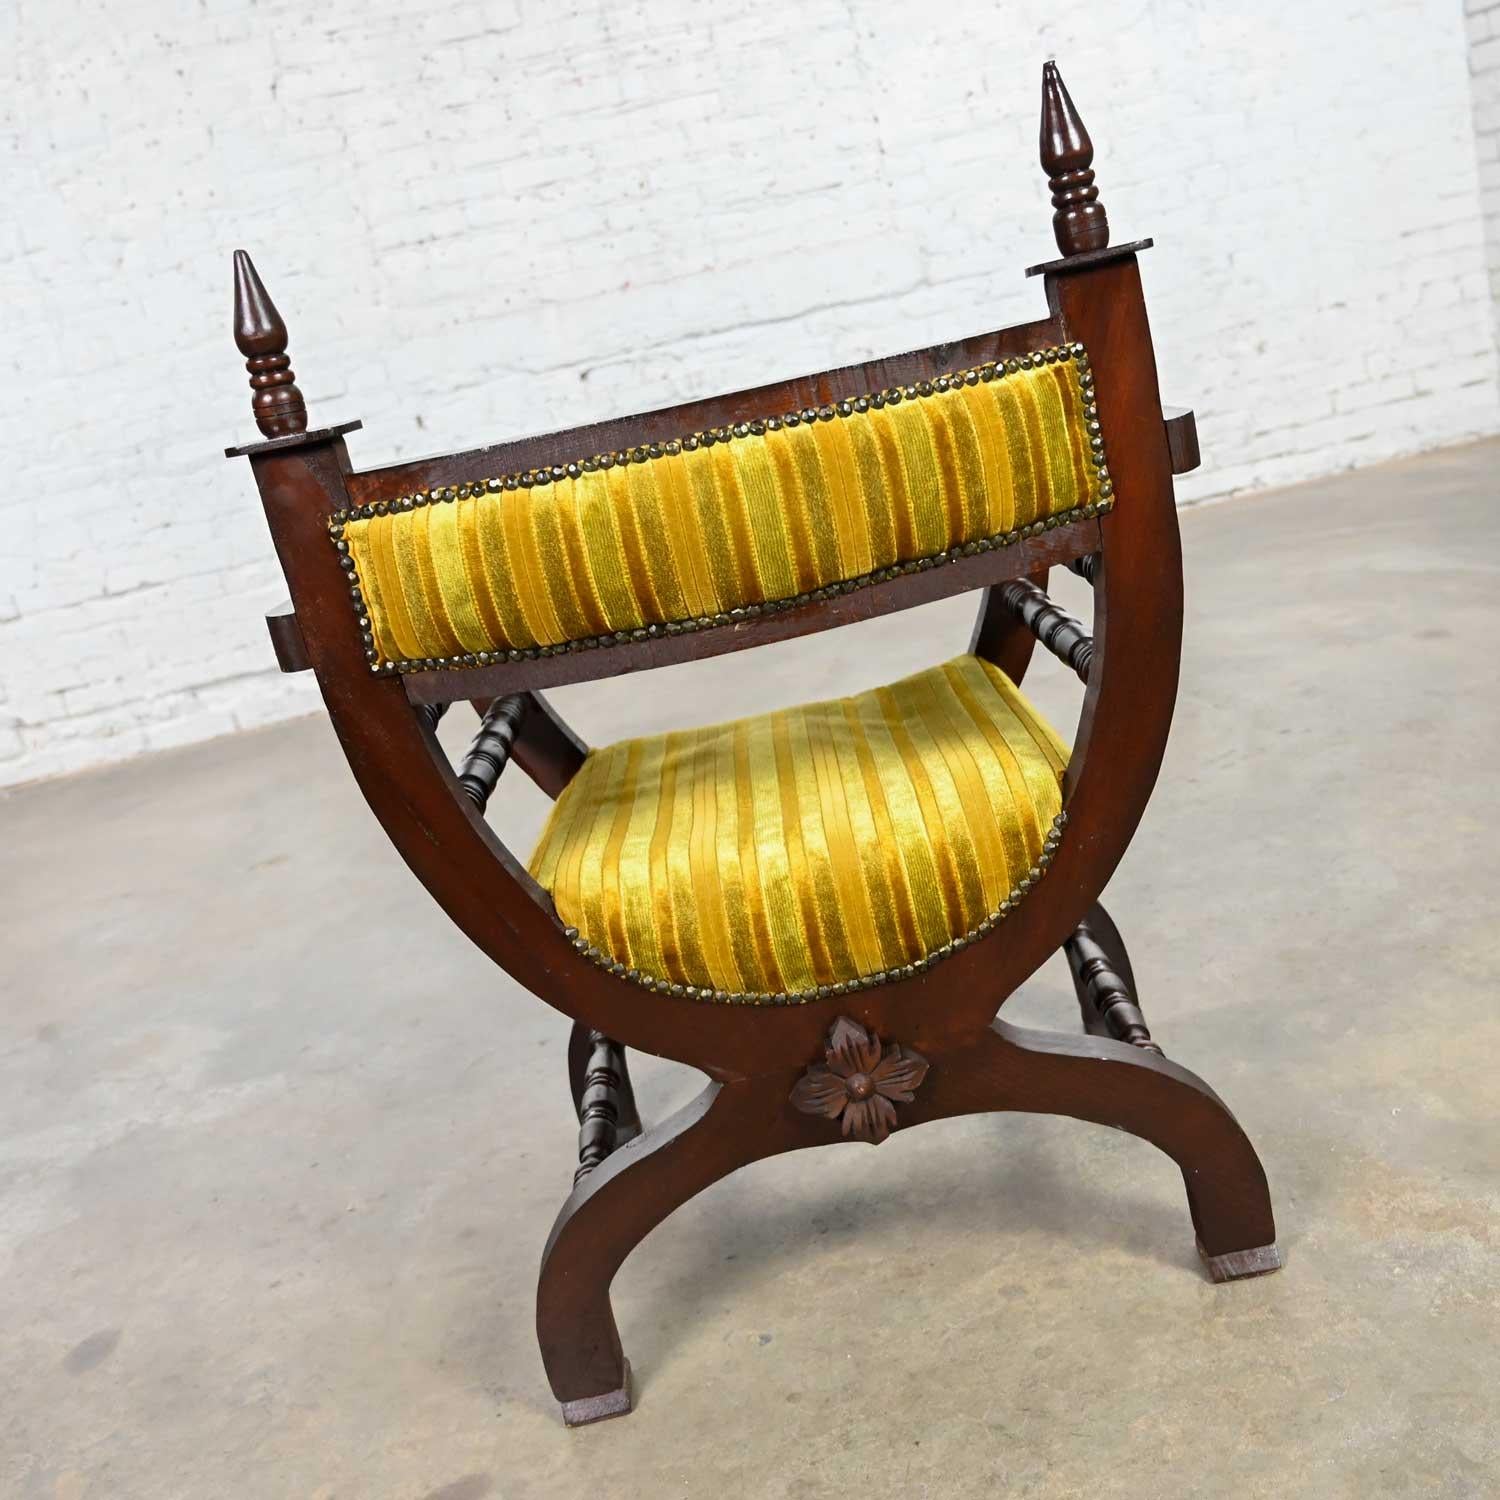 Vintage Spanish Revival Savonarola Curule Chair Striped Velvety Chenille Fabric In Good Condition For Sale In Topeka, KS